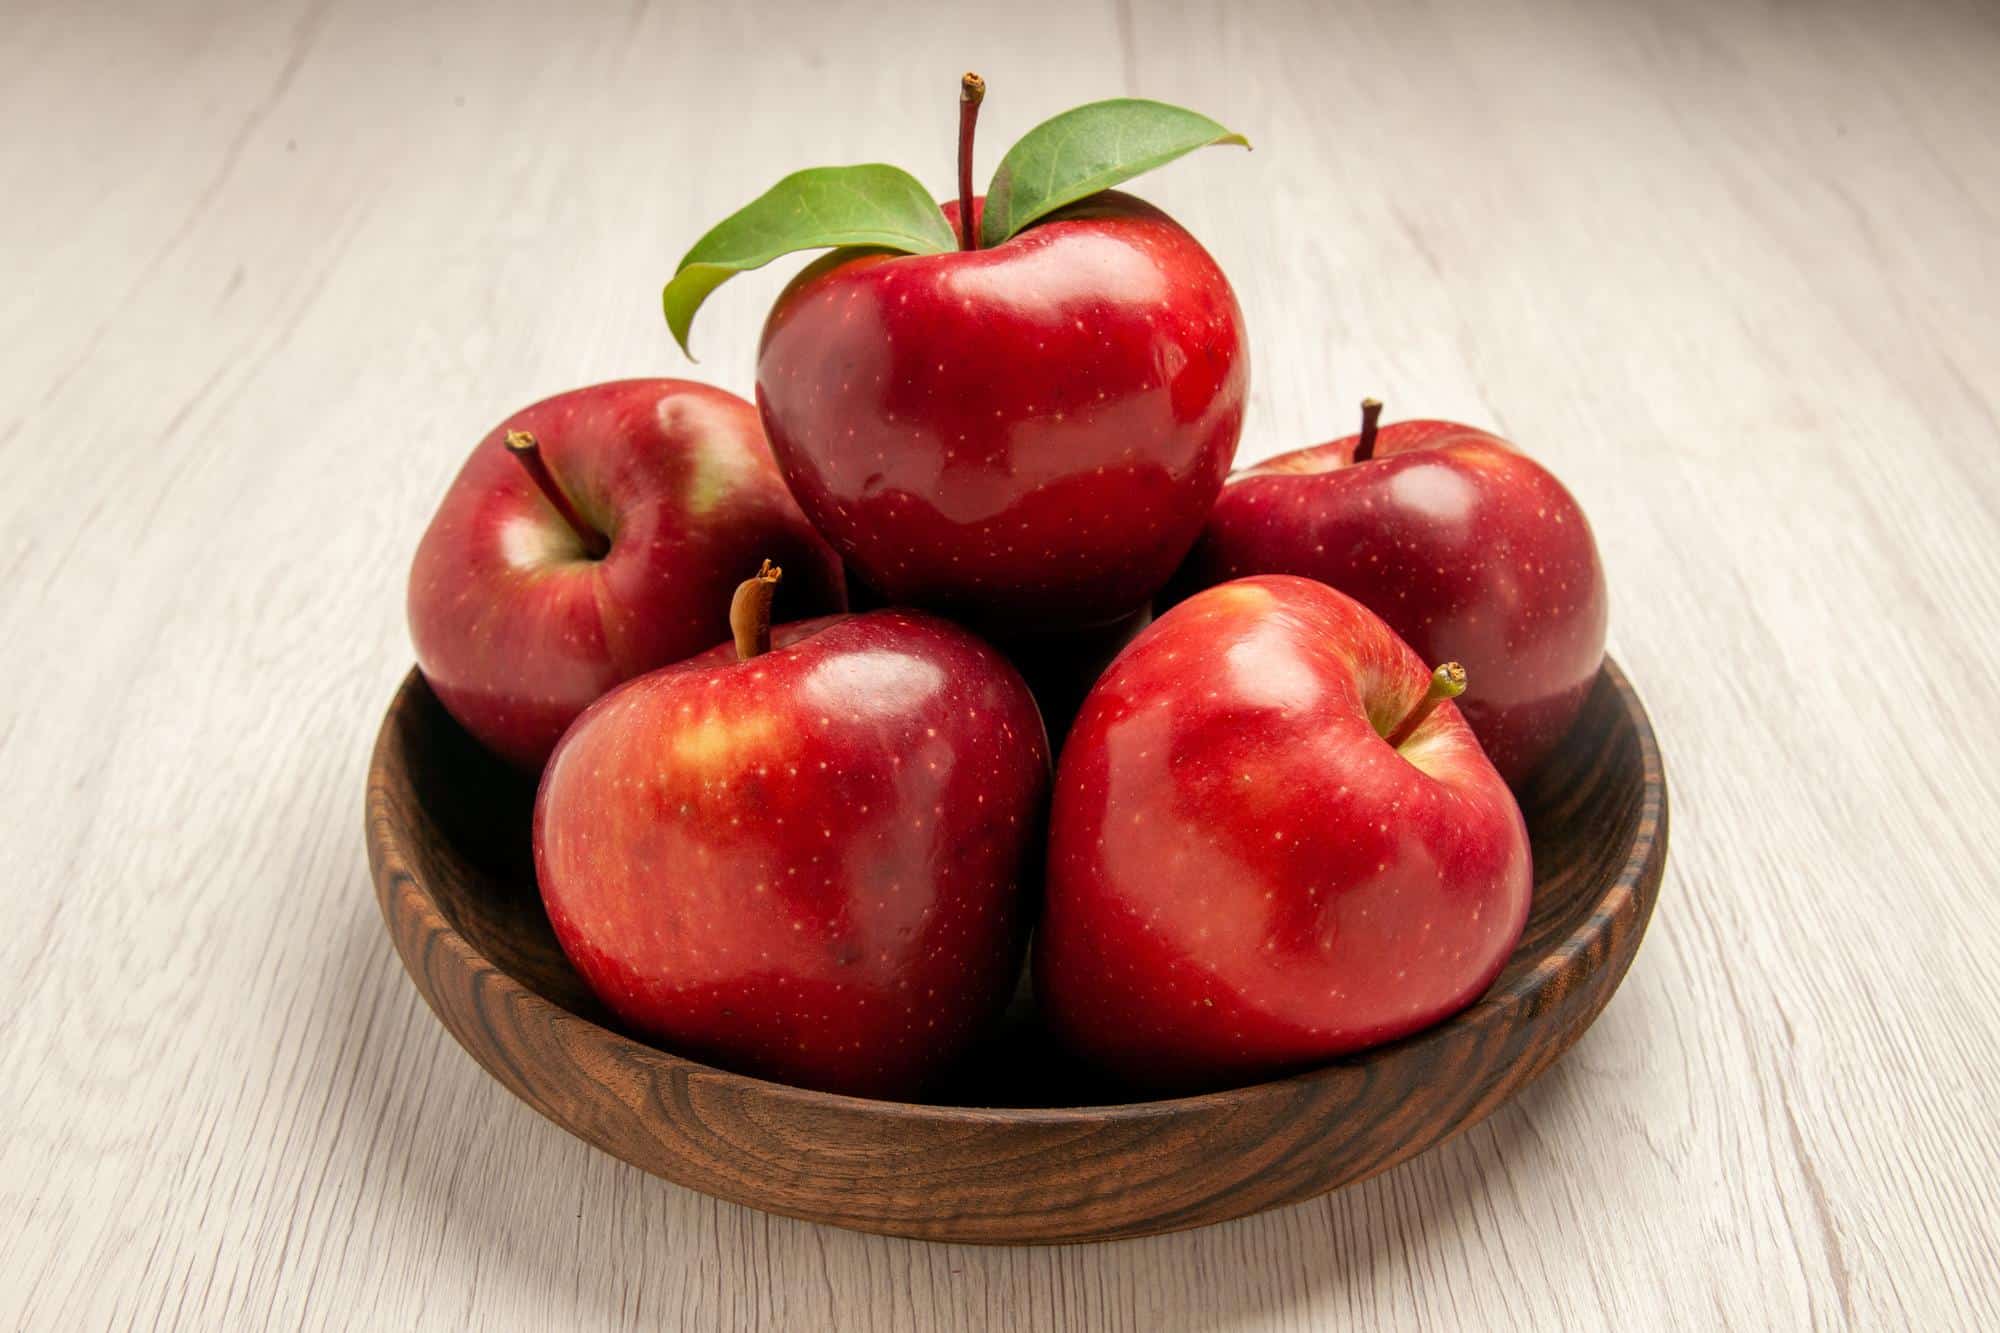 Apple and its health benefits